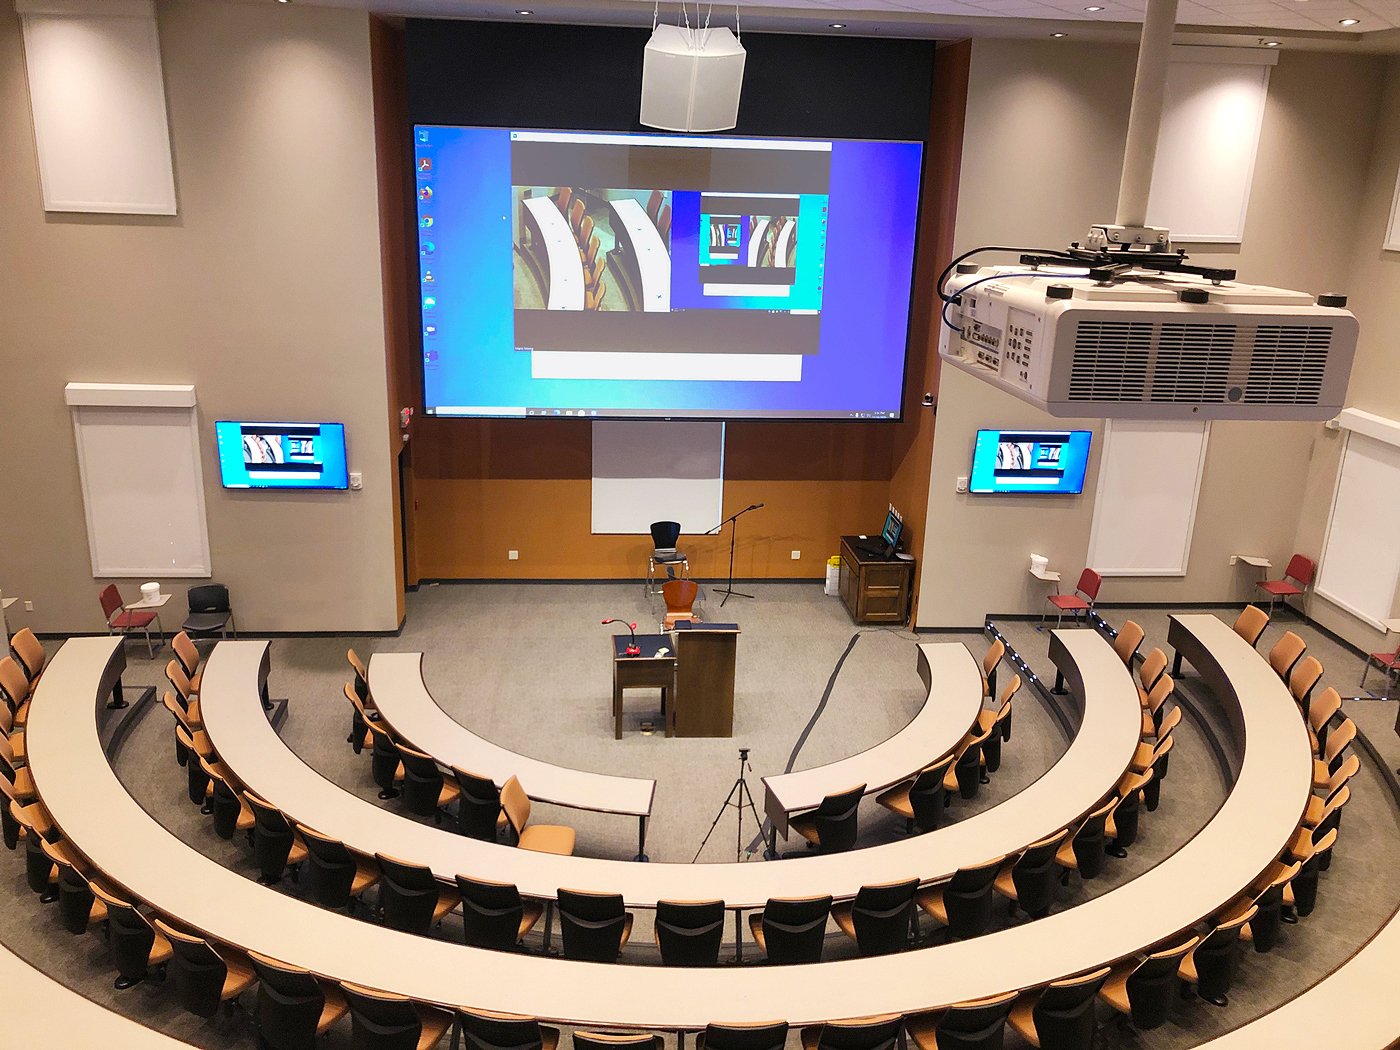 Lecture Hall viewed looking toward stage. The presenter podium is at center stage. The AV operator desk is stage left. The projector is seen in the foreground. The projection screen is flanked by two flat panel displays. A PTZ camera facing the audience is mounted to the wall at the lower right corner of the projection screen.